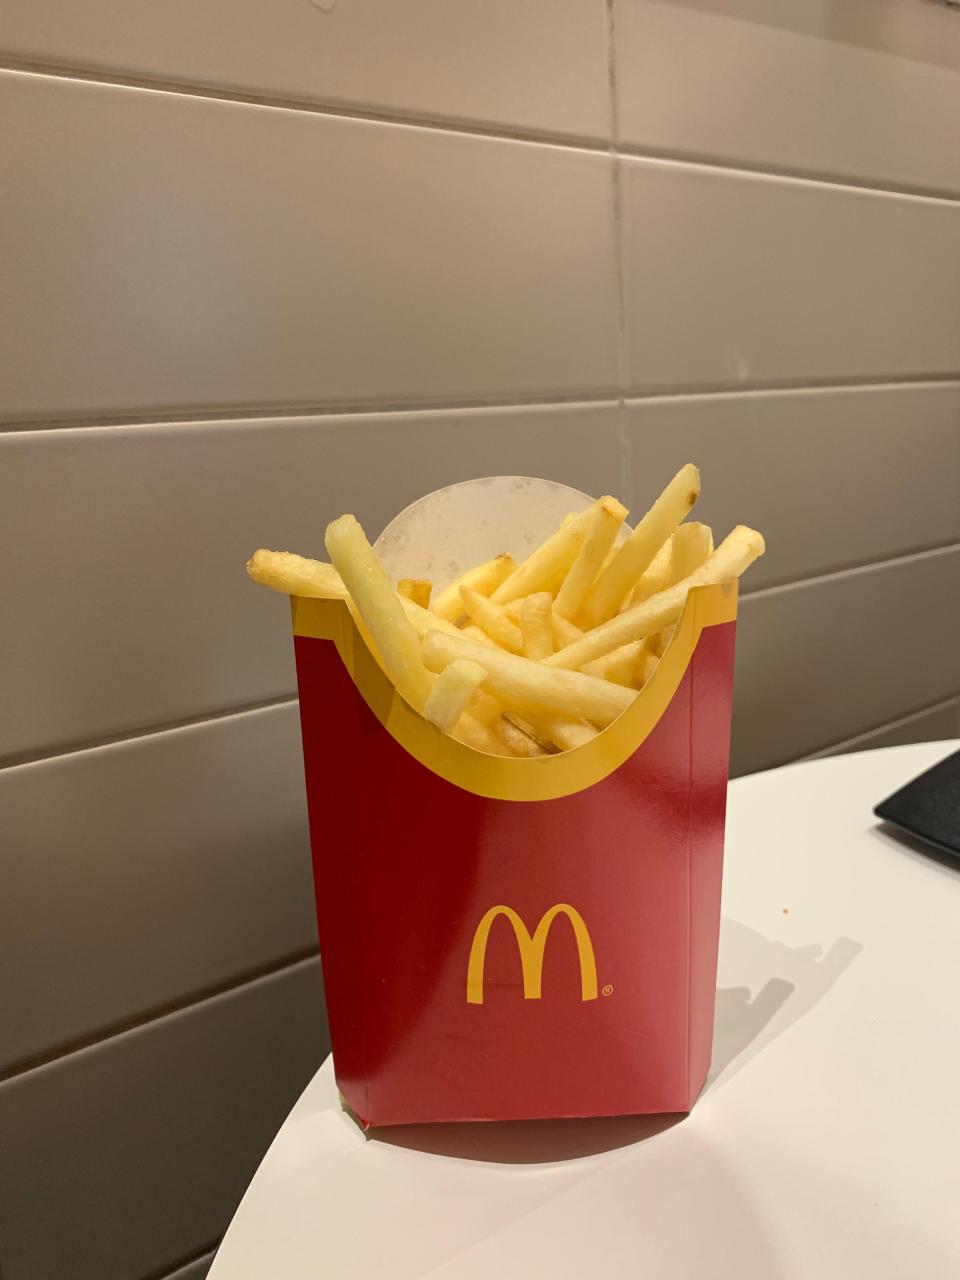 Large fries ordered at McDonald's in London, UK.